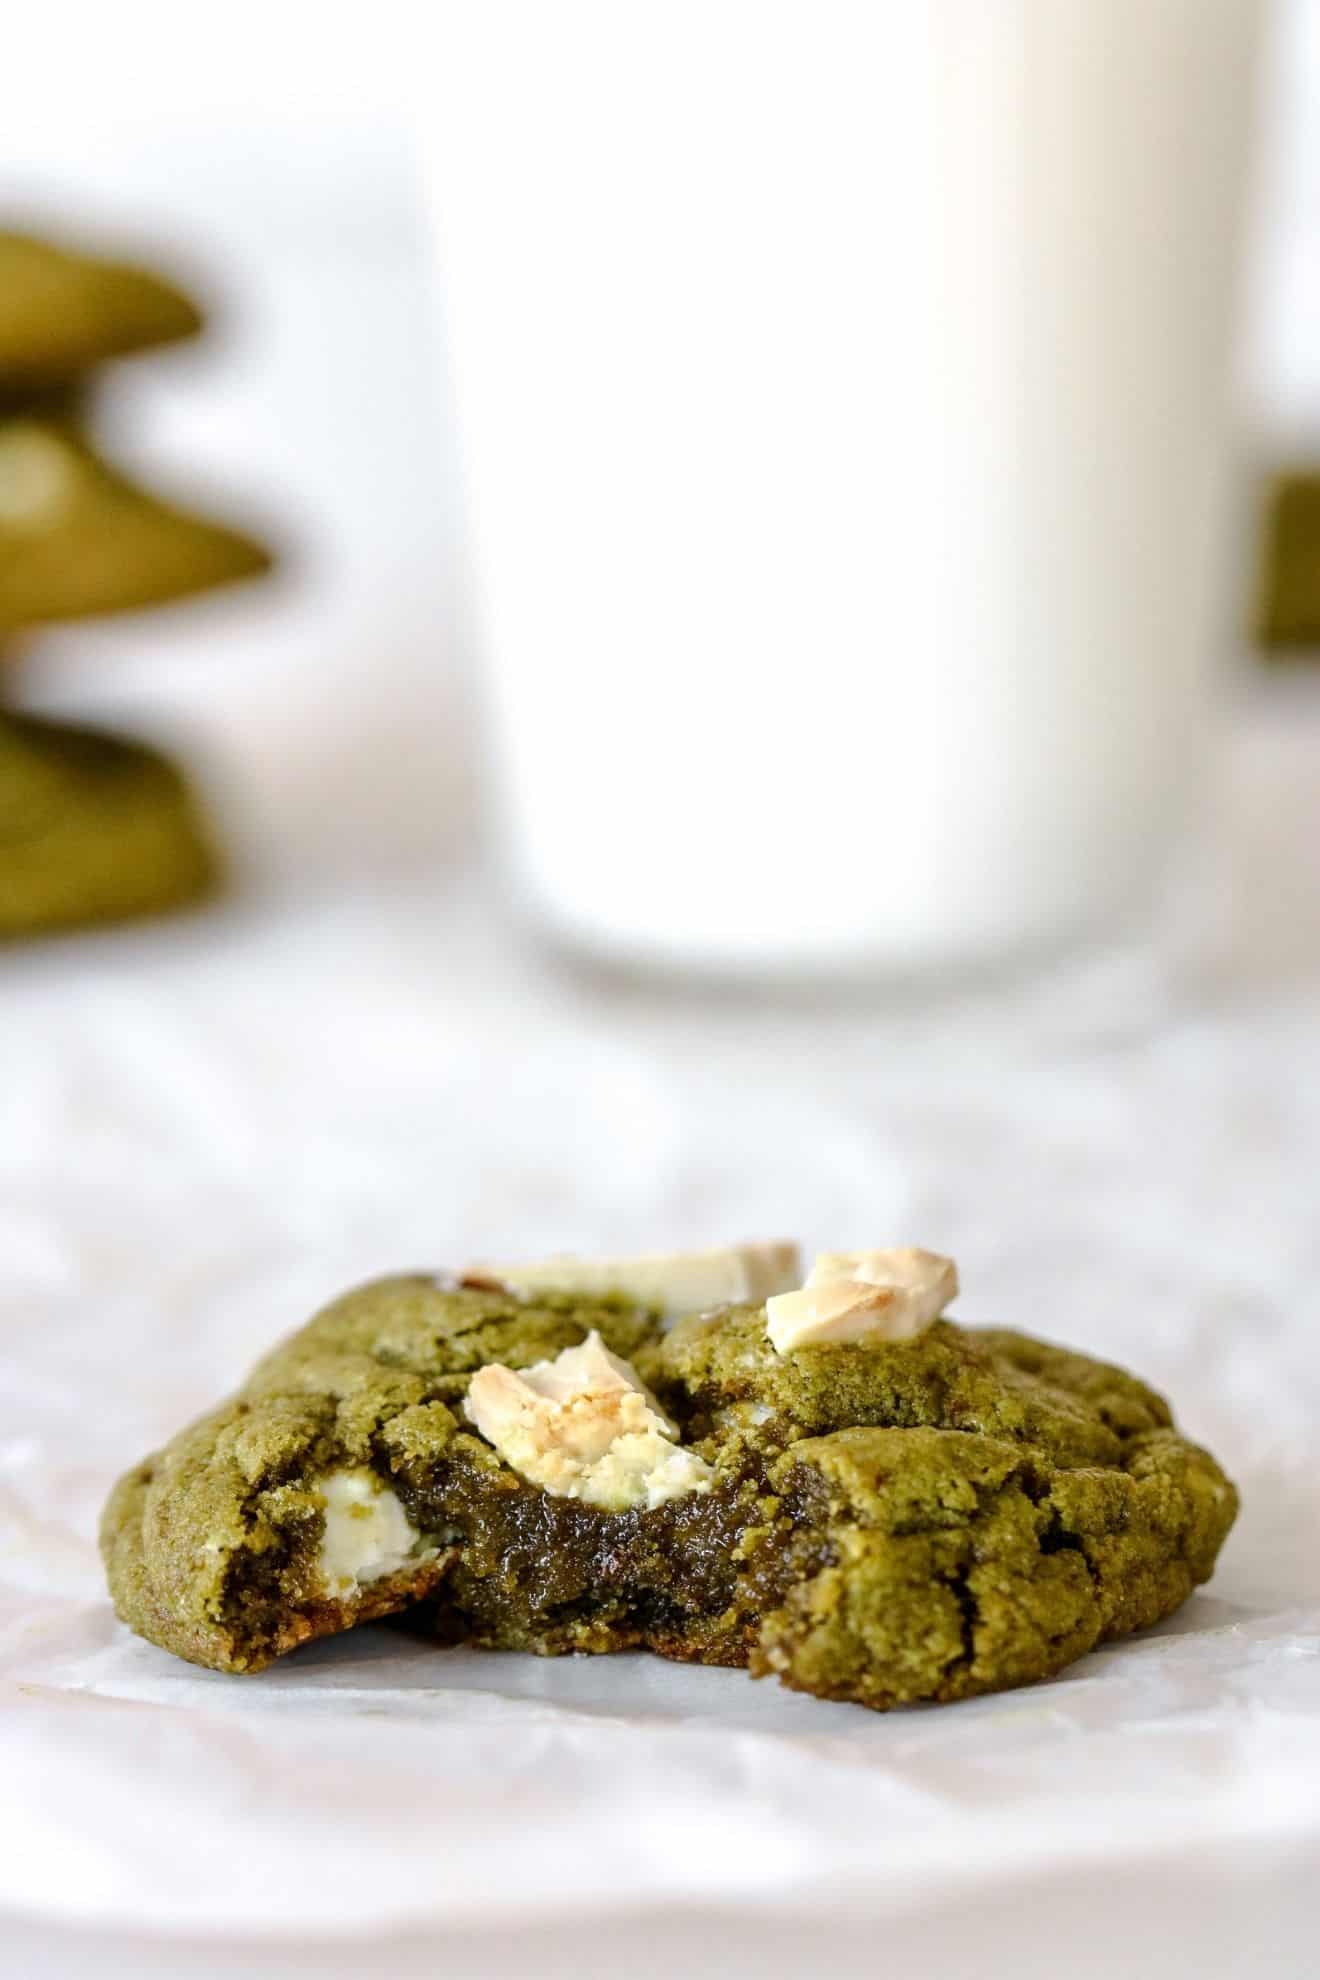 This is a side view of a green cookie with white chocolate chunks and a bite taken out of it. The cookies sit on a white piece of parchment paper with a glass of milk and more green cookies blurred in the background.